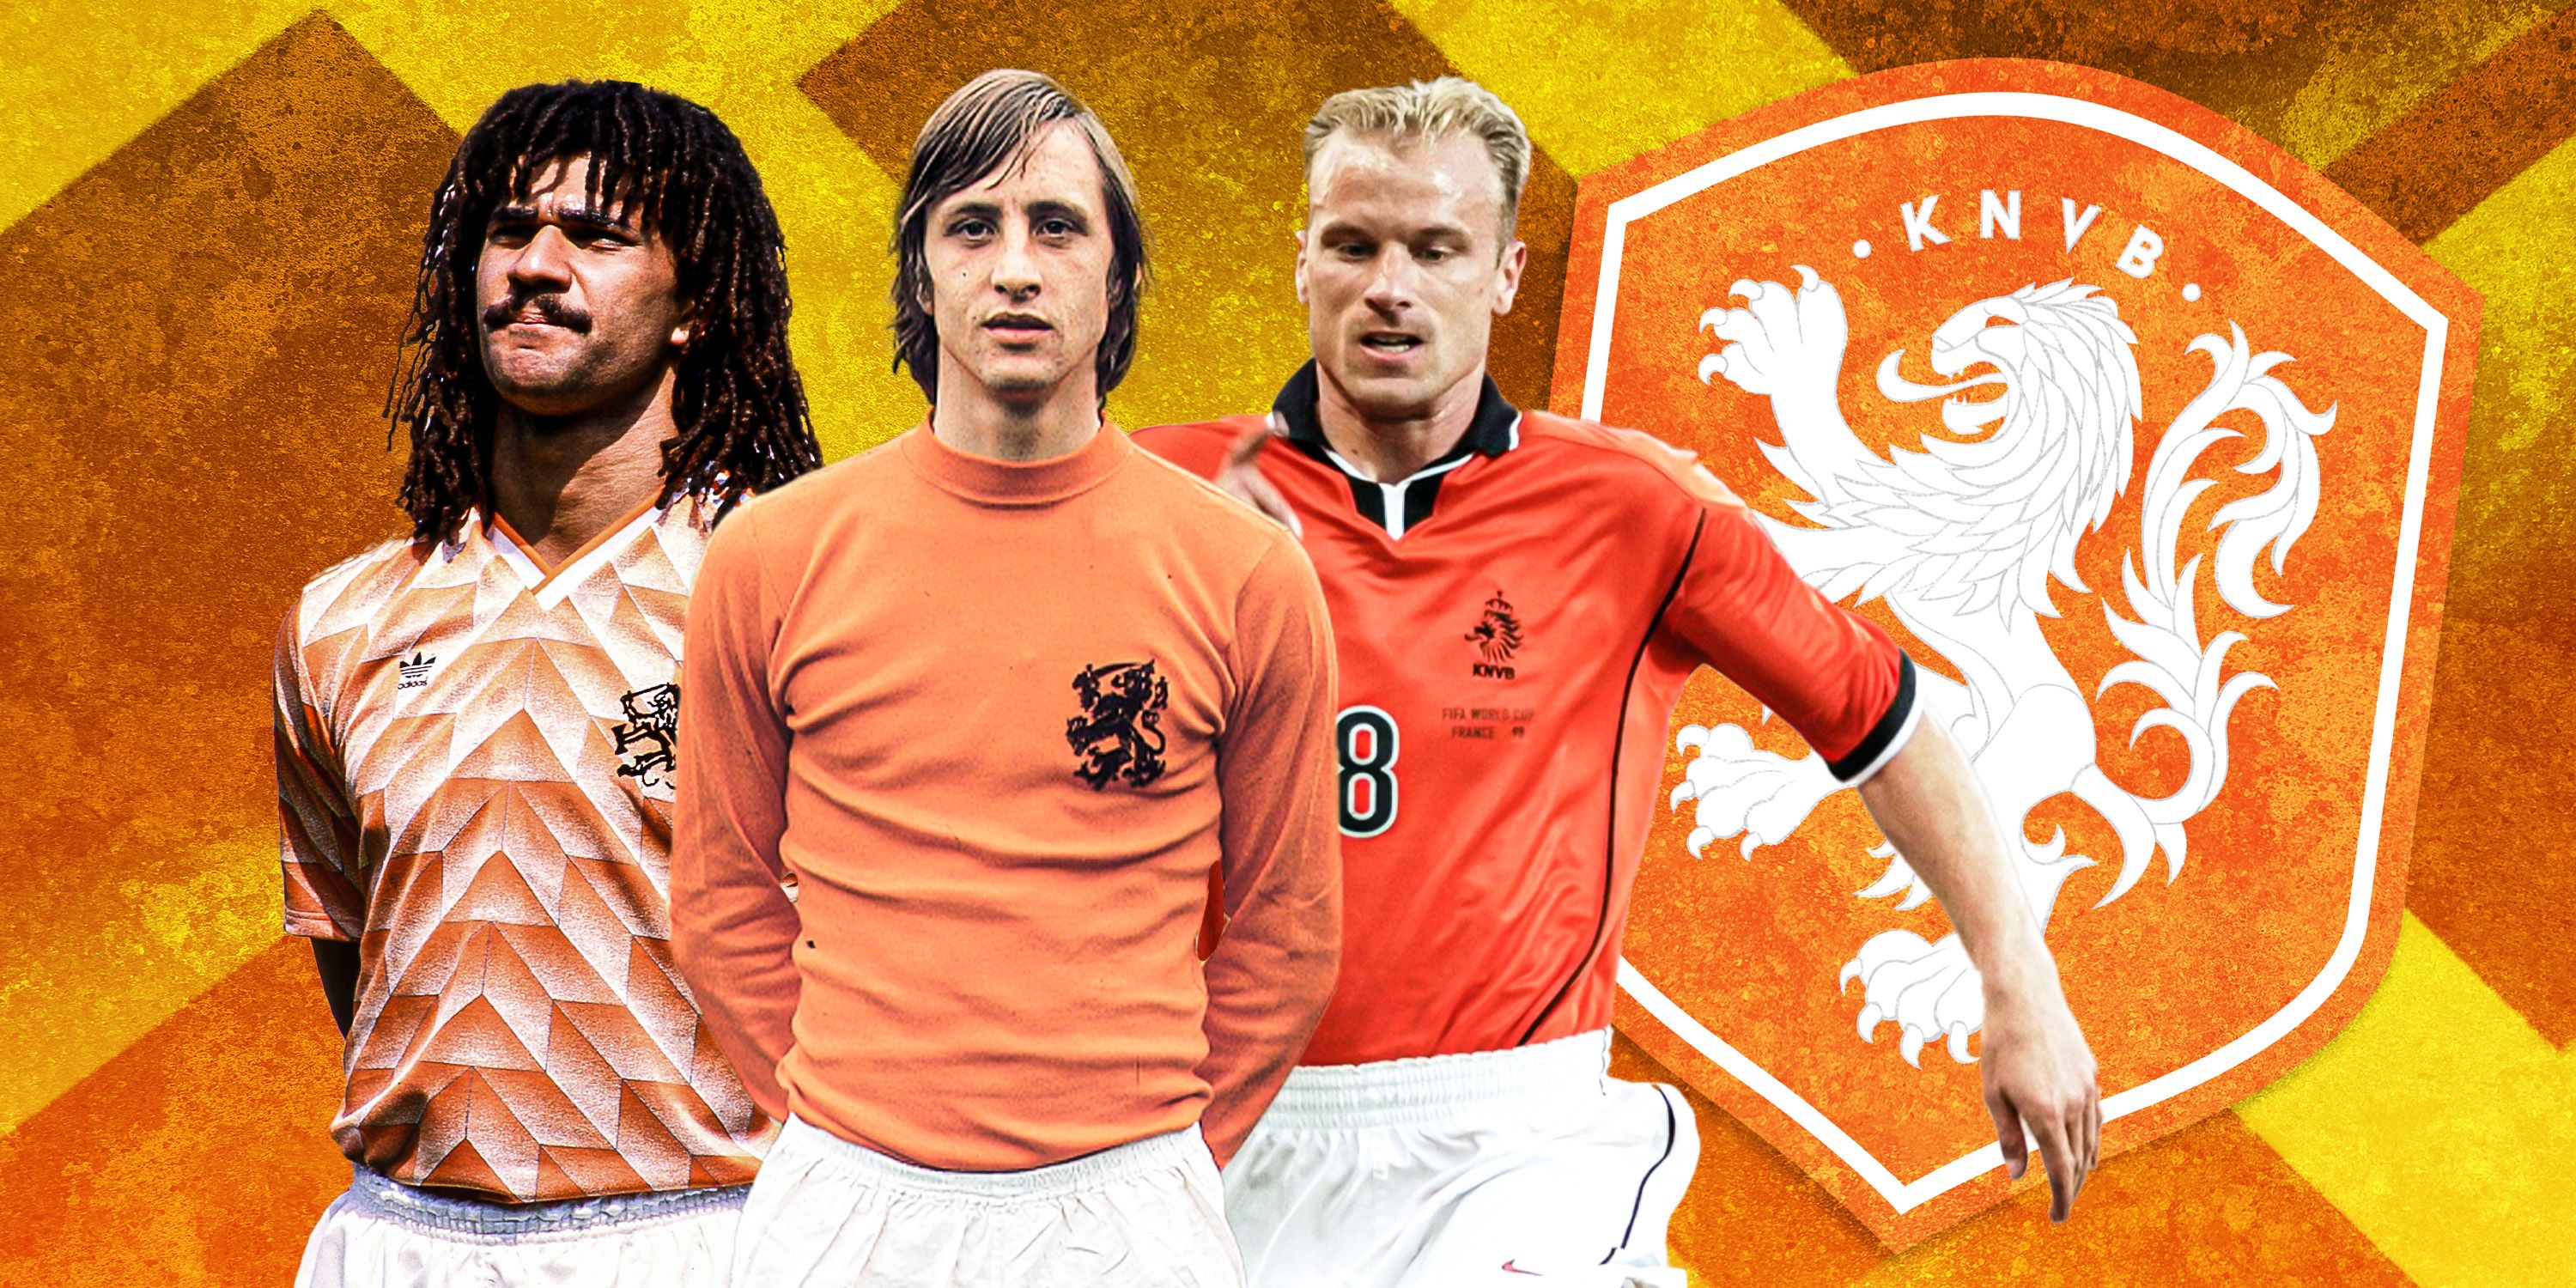 The 10 greatest Dutch players of all time have been ranked